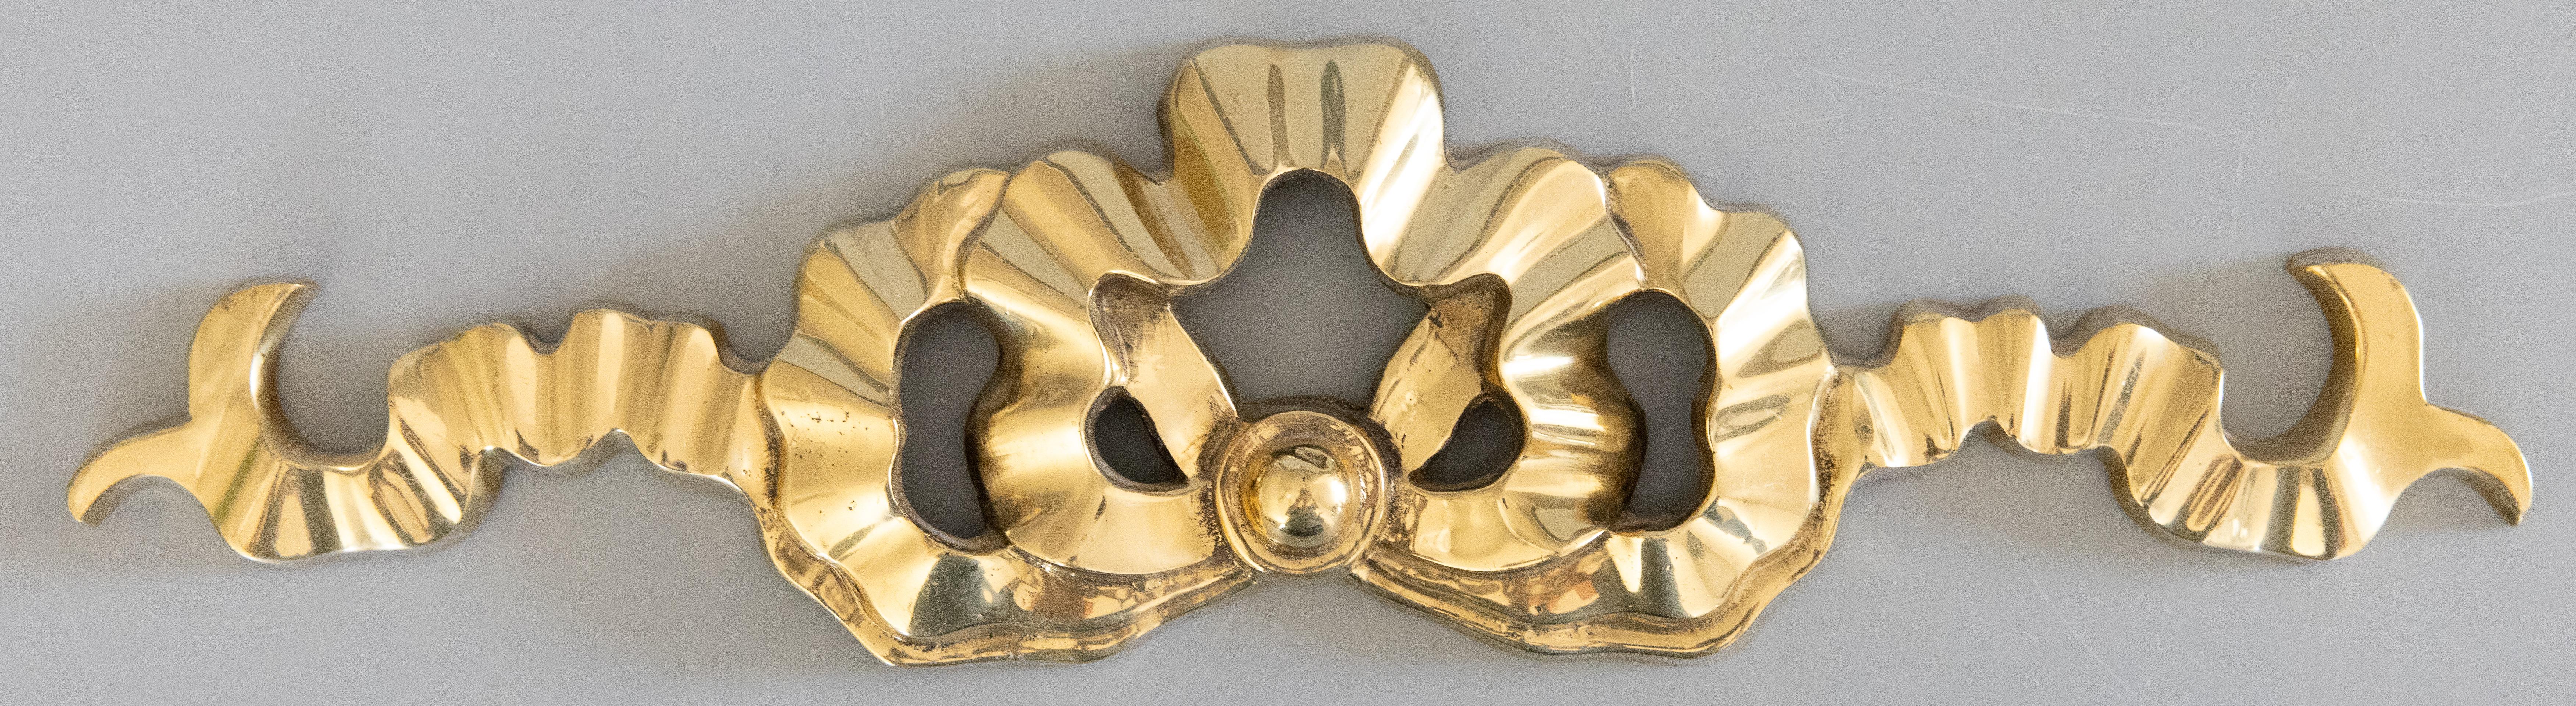 Mid-20th Century French Brass Bow & Ribbon Wall Ornament Swag Garland For Sale 2